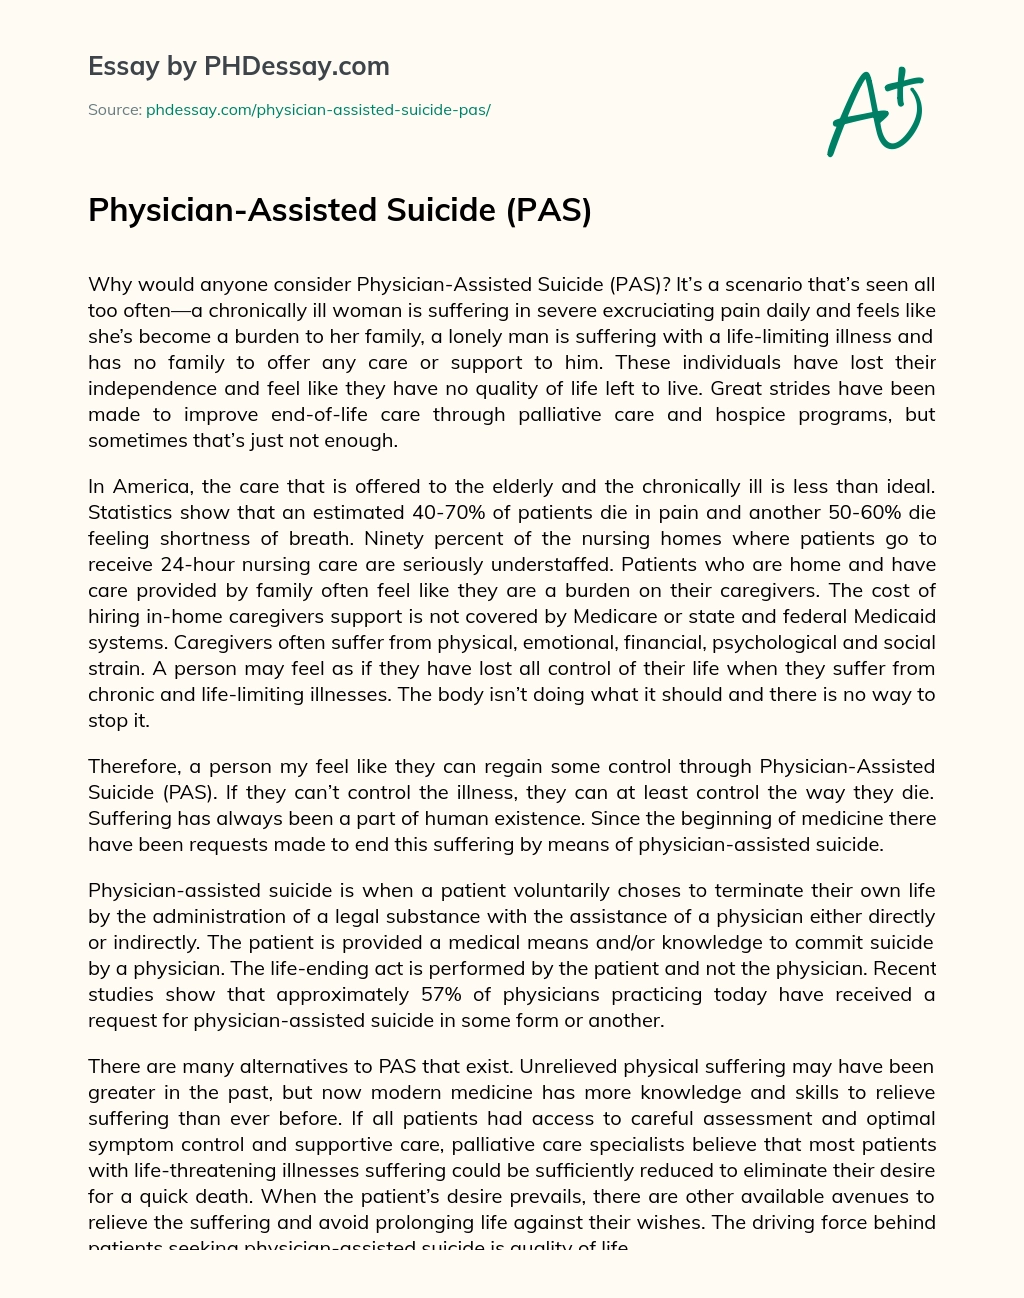 Physician-Assisted Suicide (PAS) essay